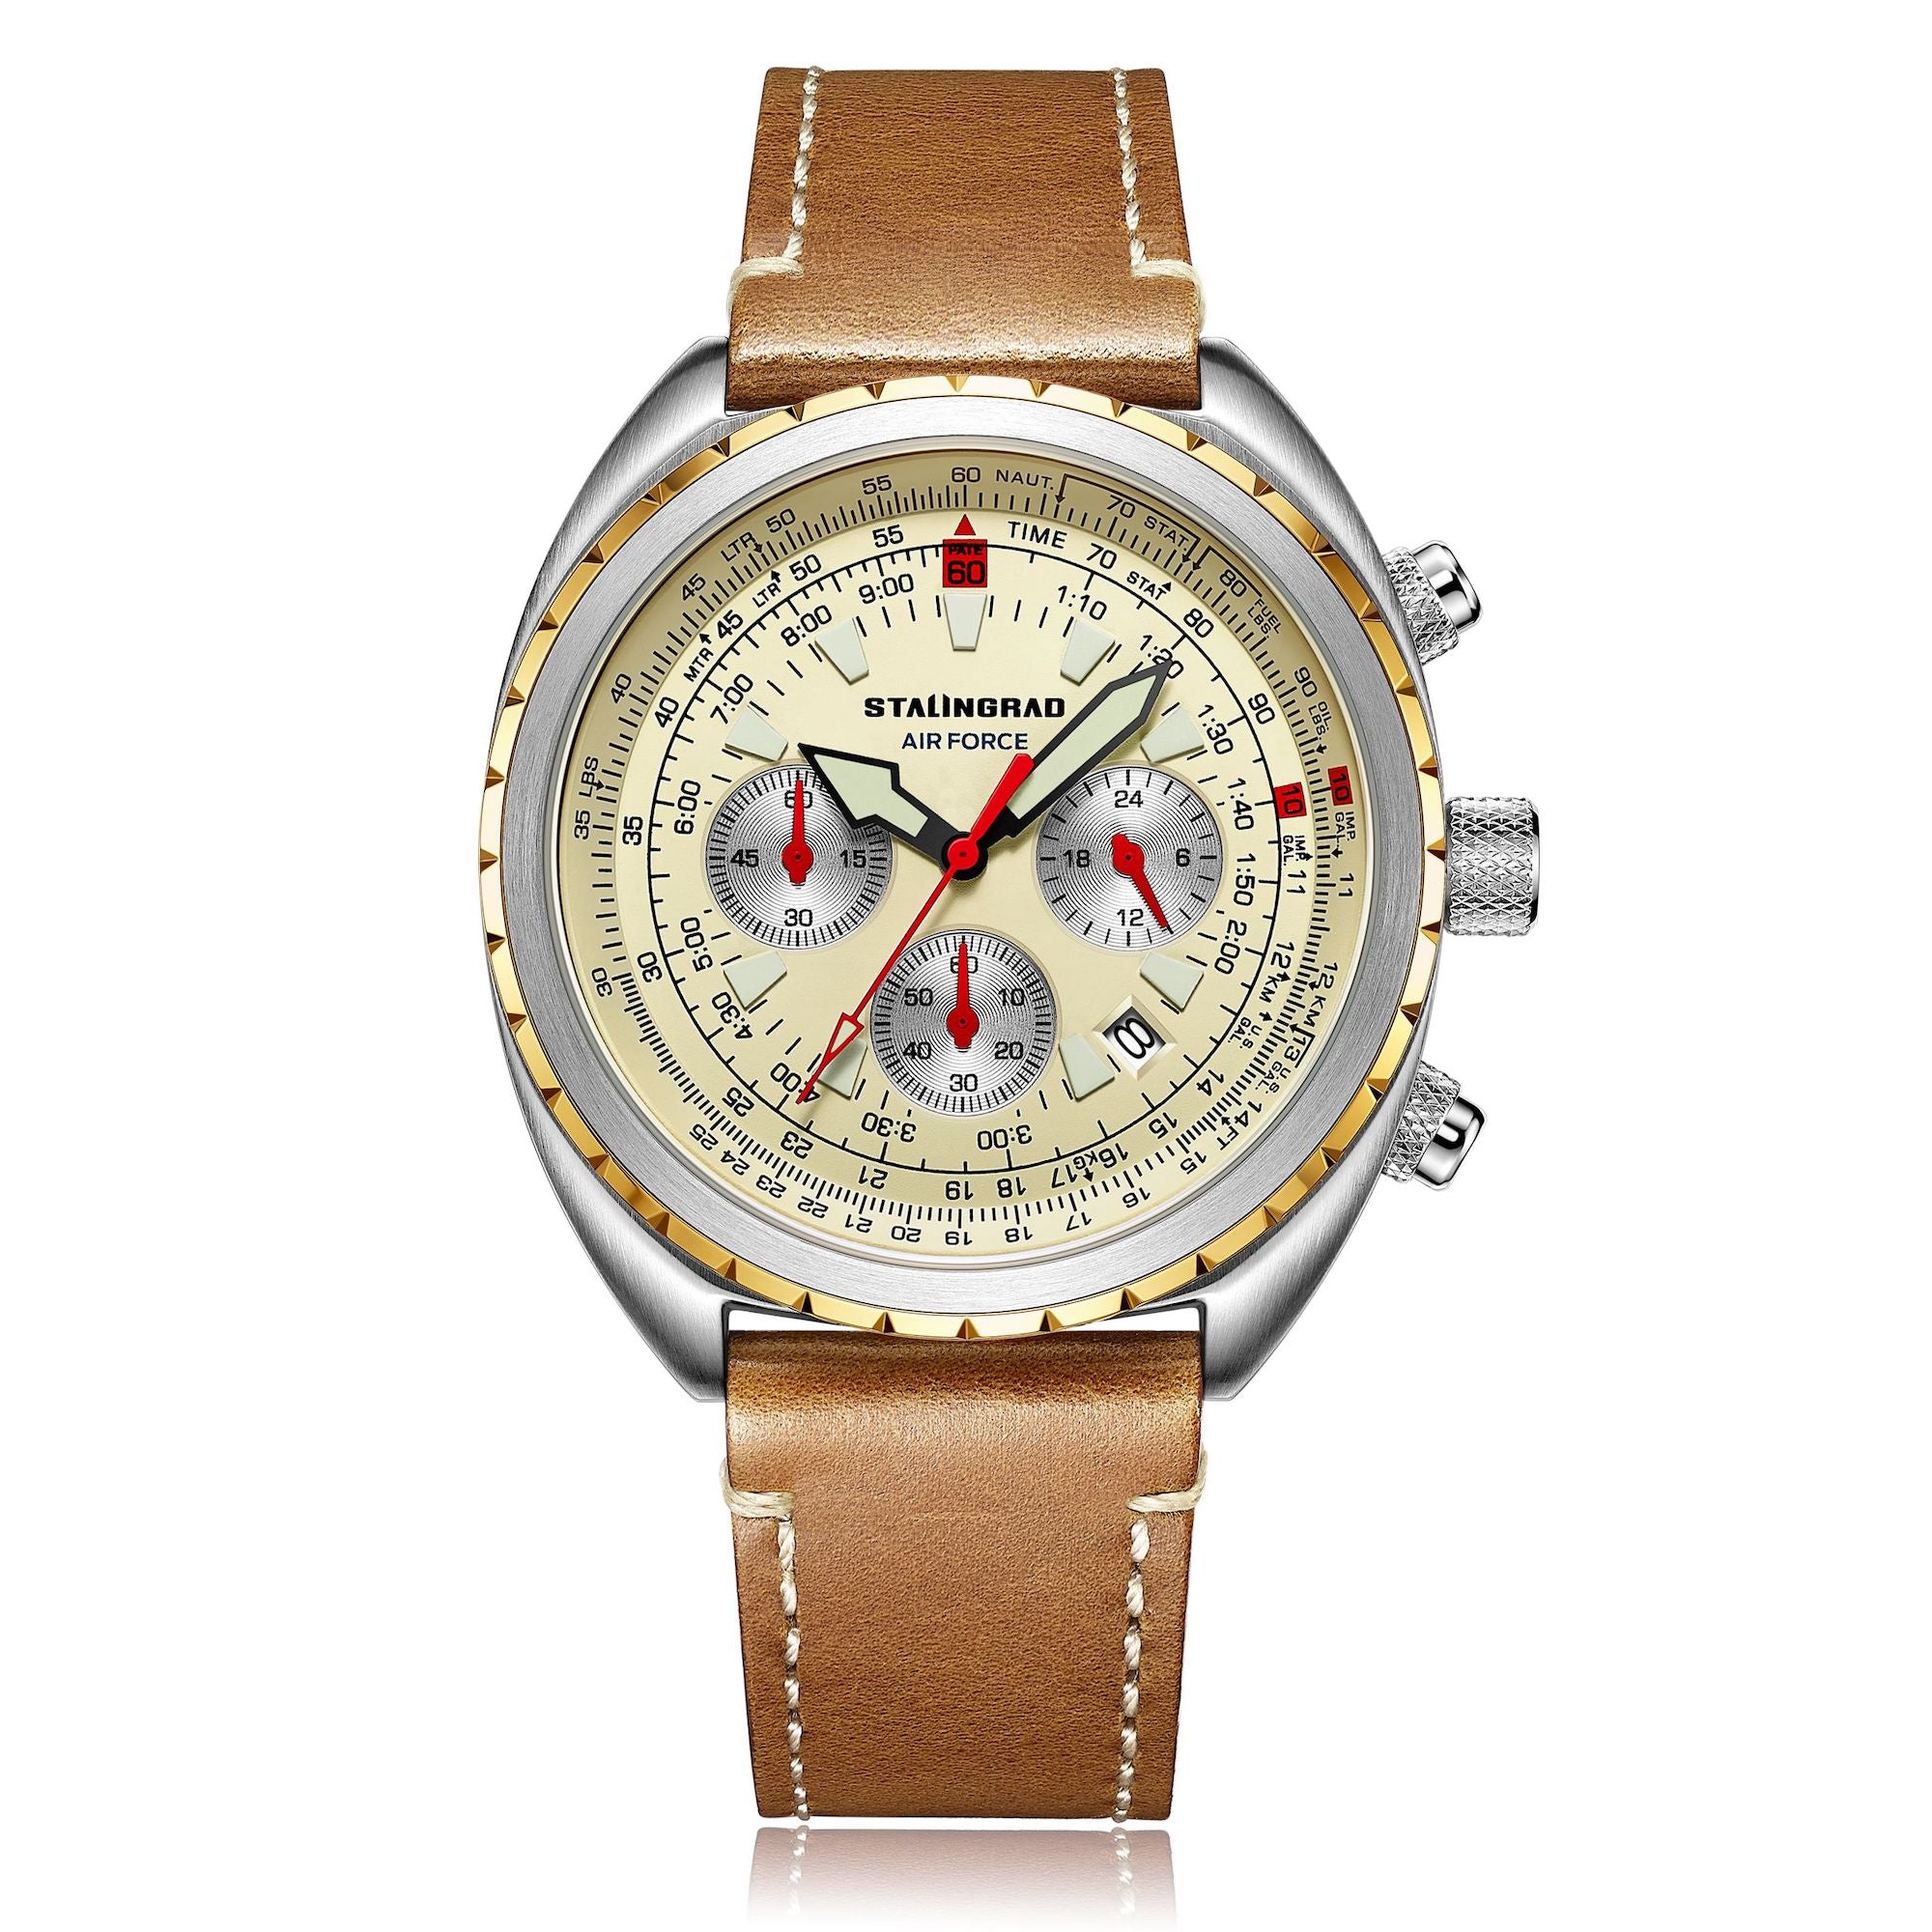 Stalingrad Novikov Chronograph Pilot Watch beige dial and brown leather strap on a white background. 